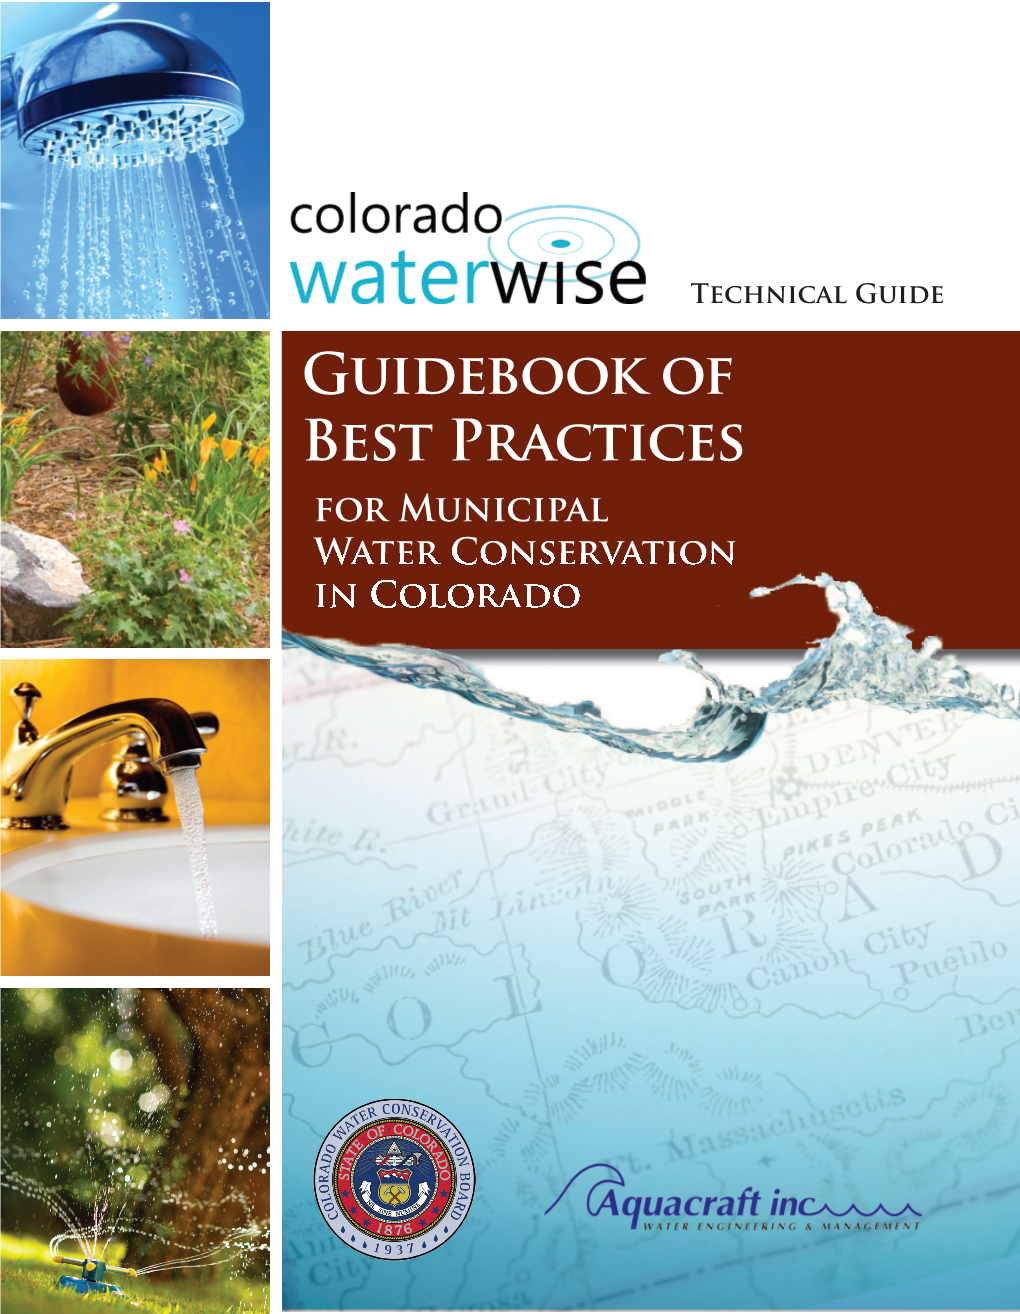 Guidebook of Best Practices for Municipal Water Conservation in Colorado Copyright